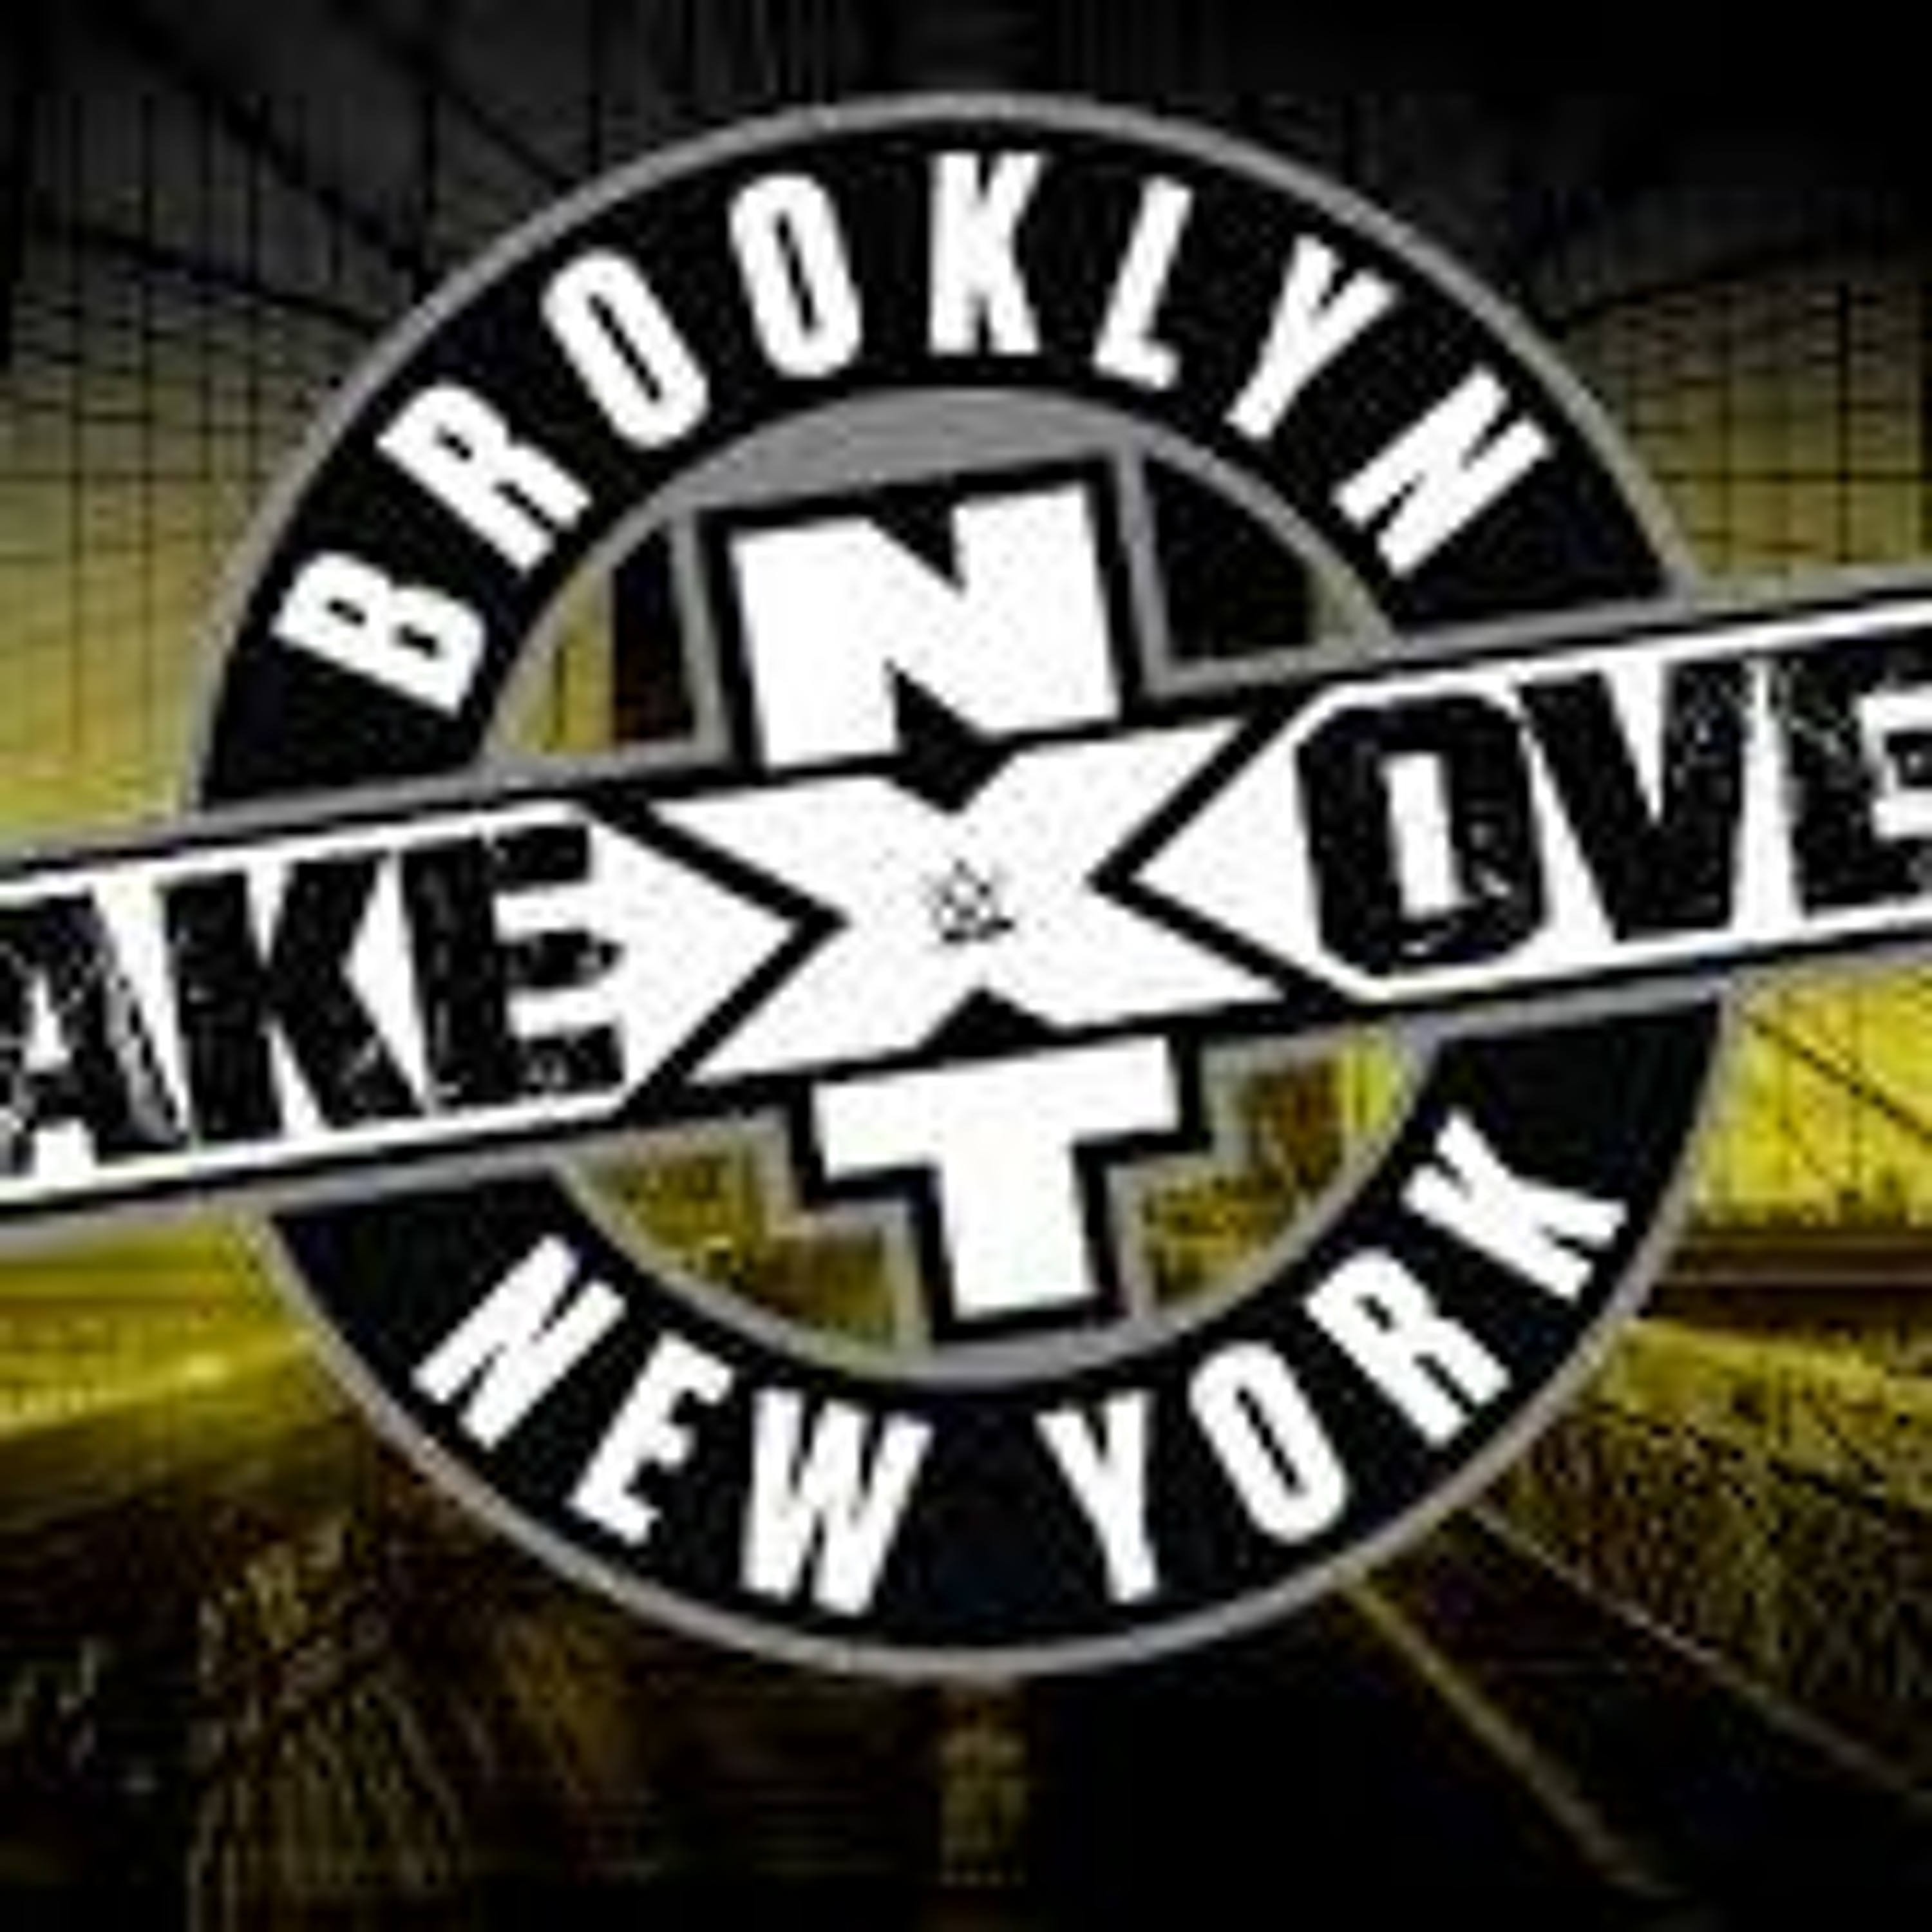 WE TALK NXT EP.131 |NXT TakeOver: Brooklyn IV Predictions 8/16/18|